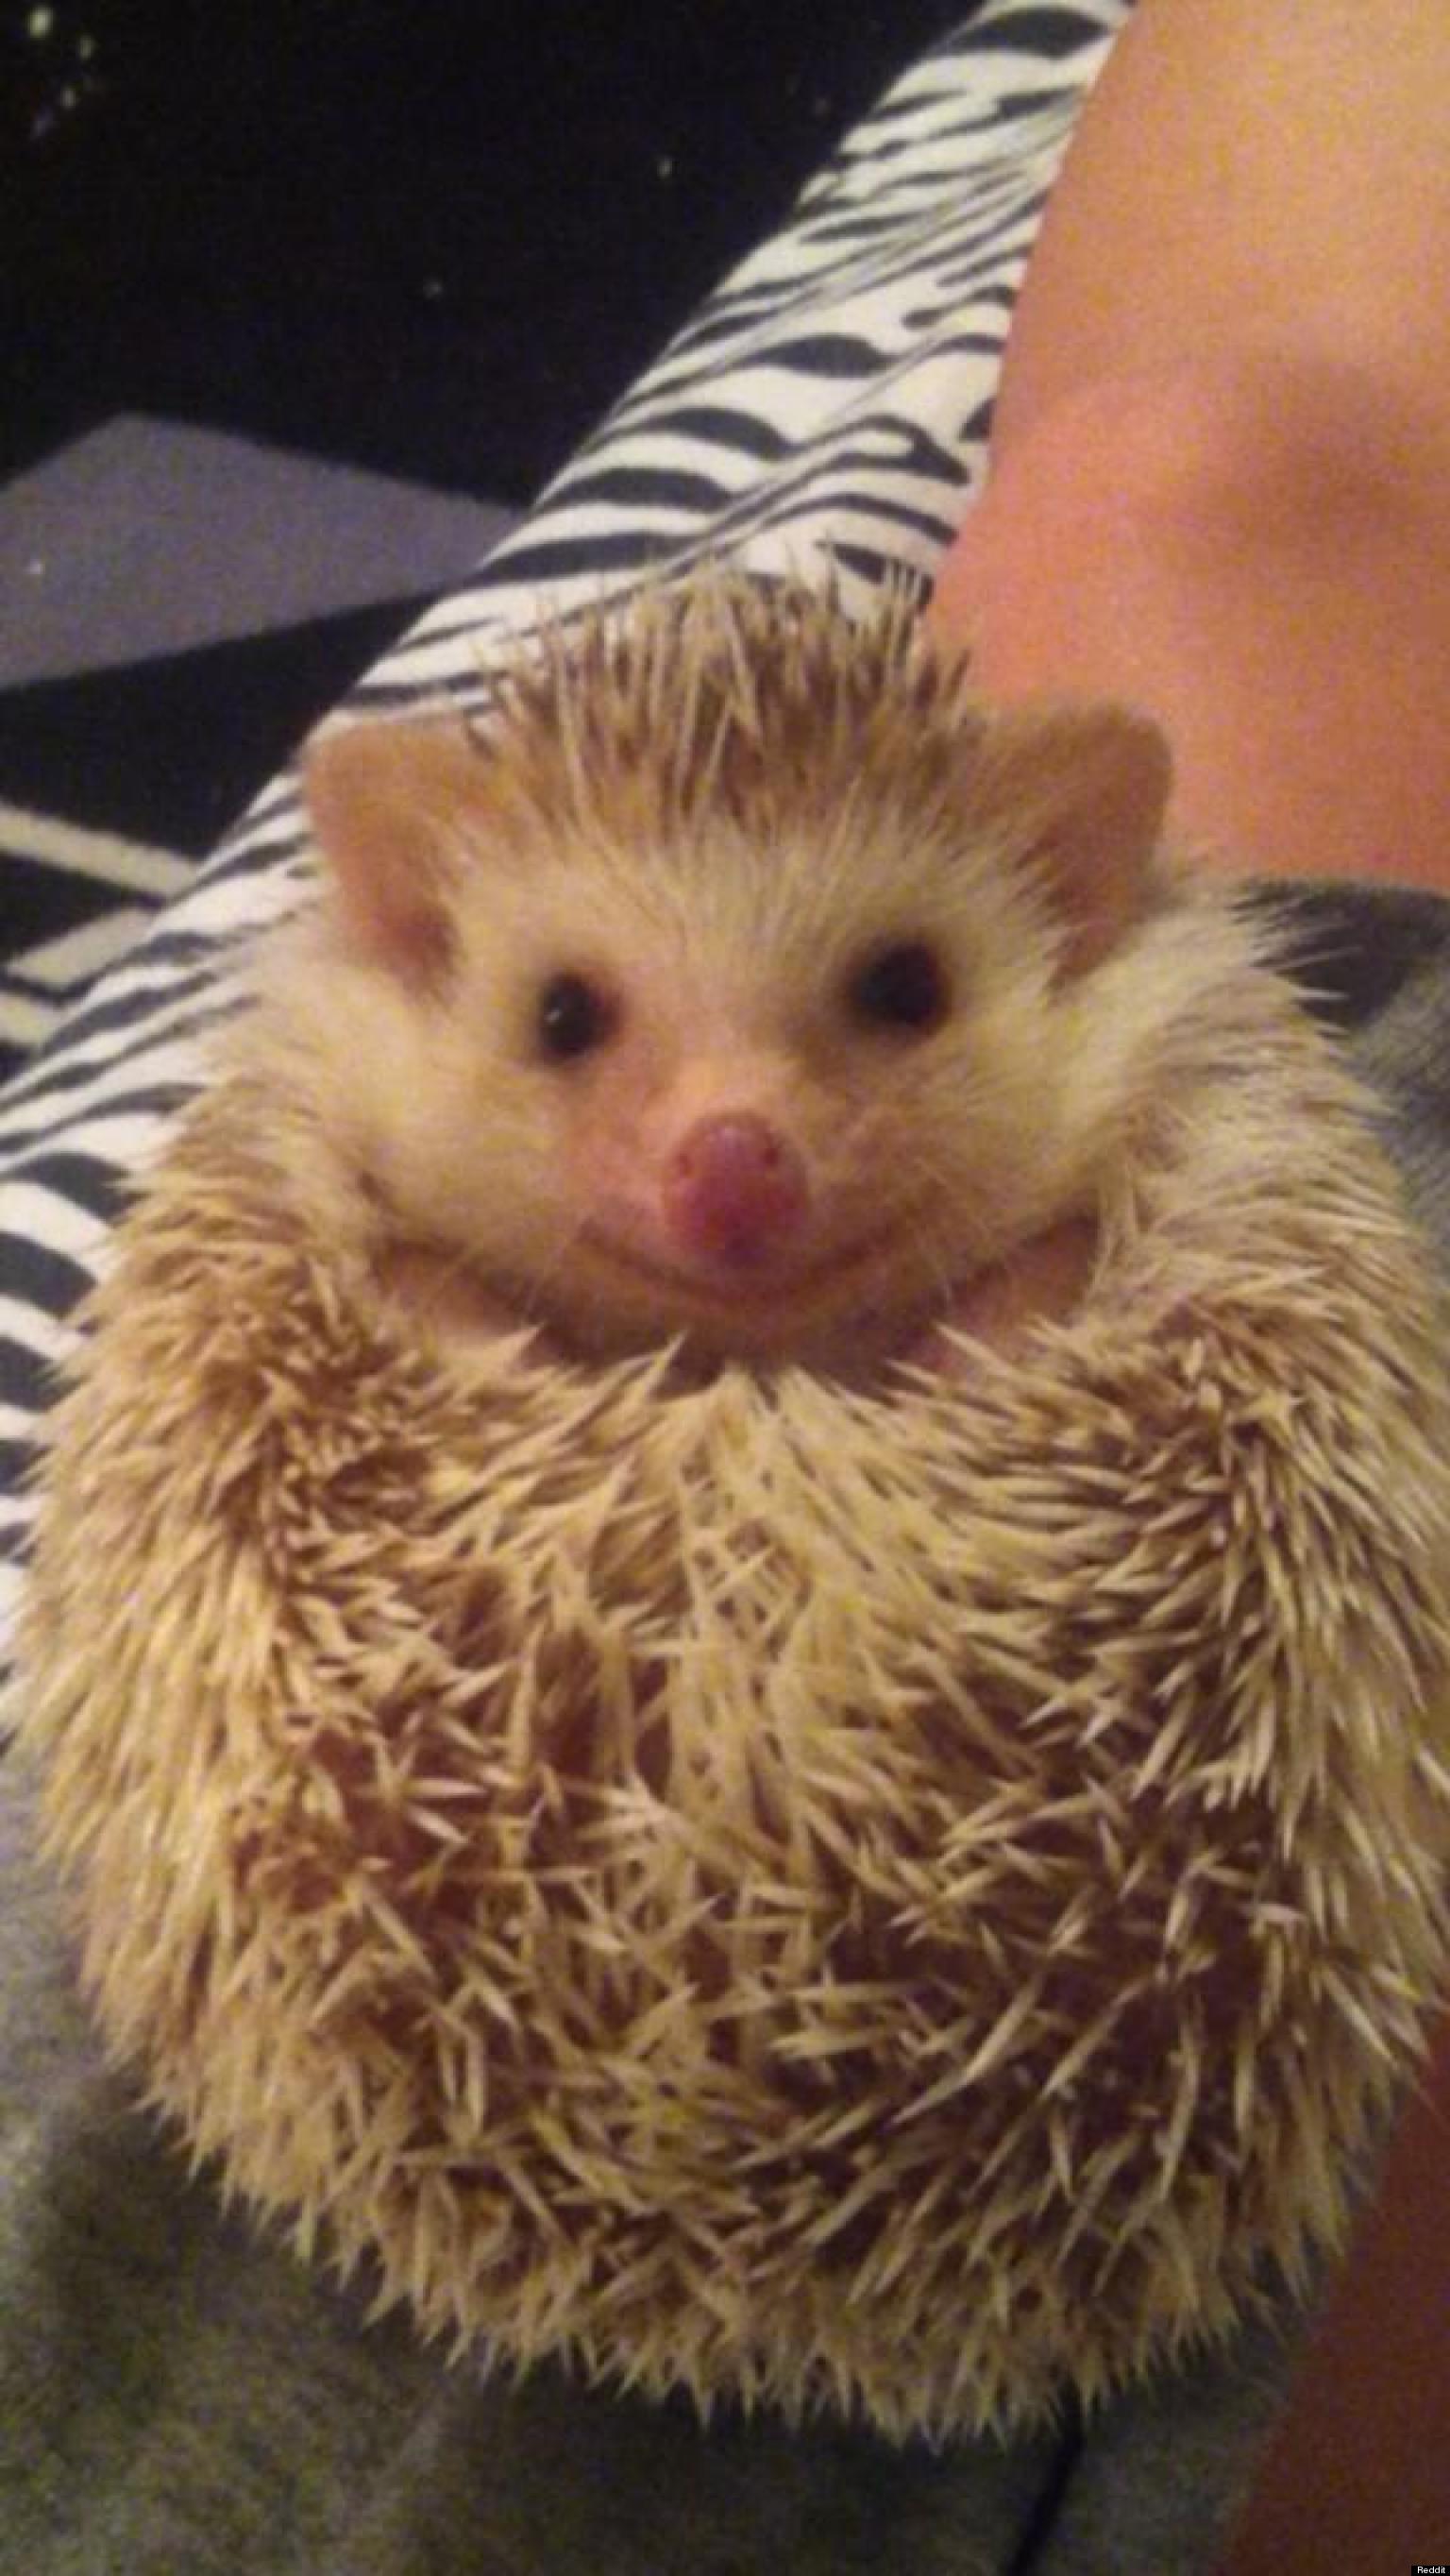 Adorable Hedgehog Smiling Again After Being Mistreated By Previous